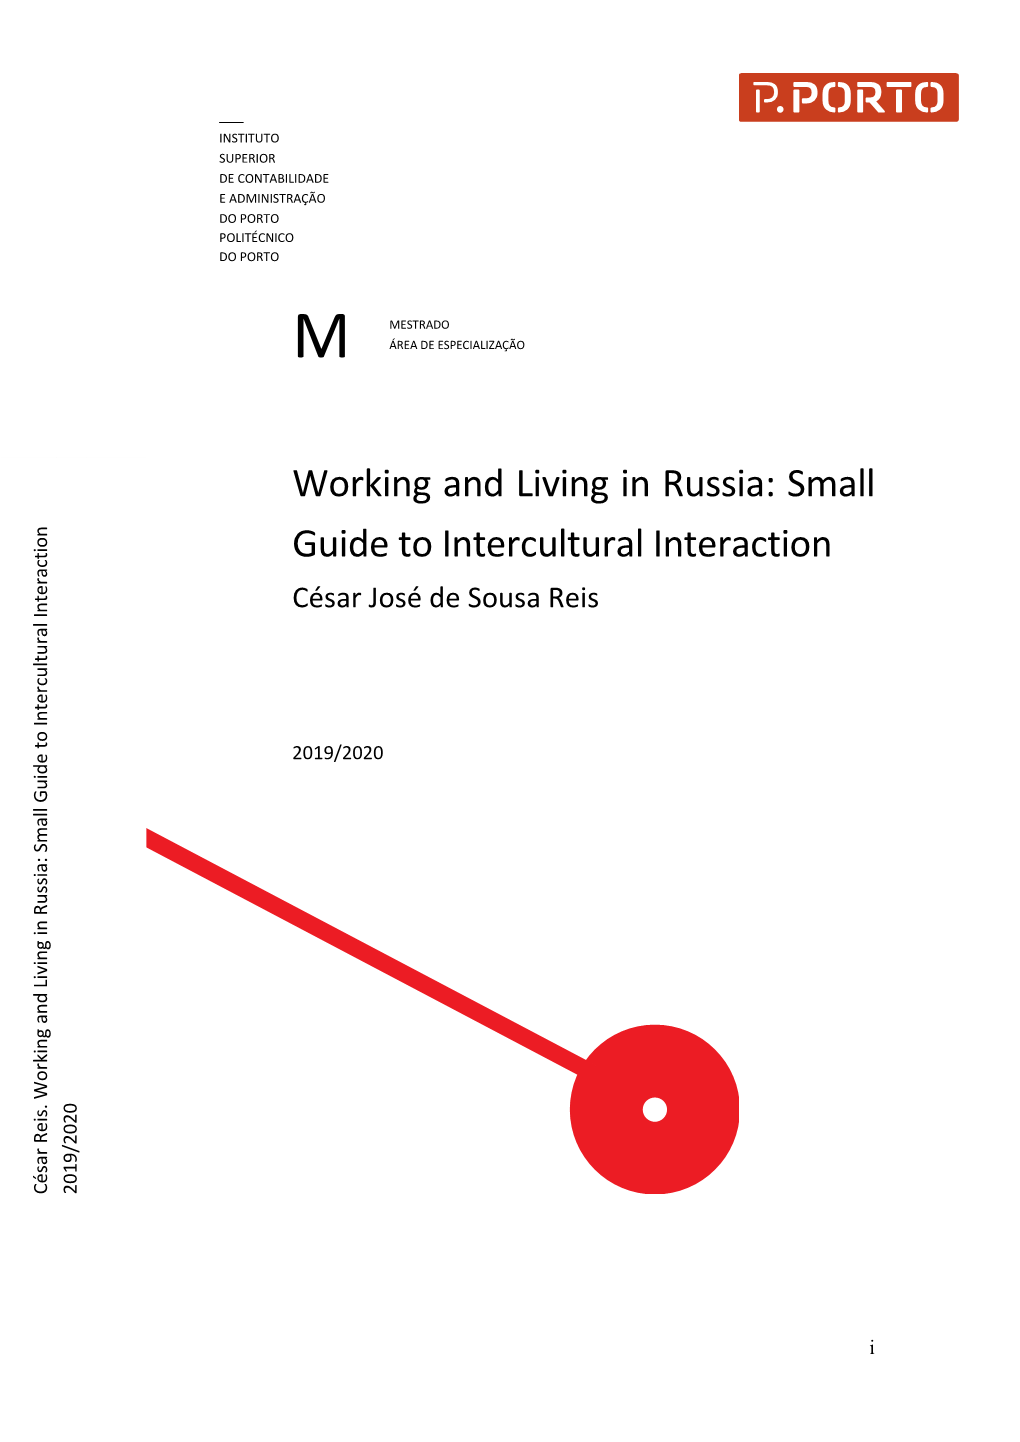 Small Guide to Intercultural Interaction”, Addresses the Need for a Guide Containing Guidelines and Tips for Portuguese People Who Are Relocating in Russia